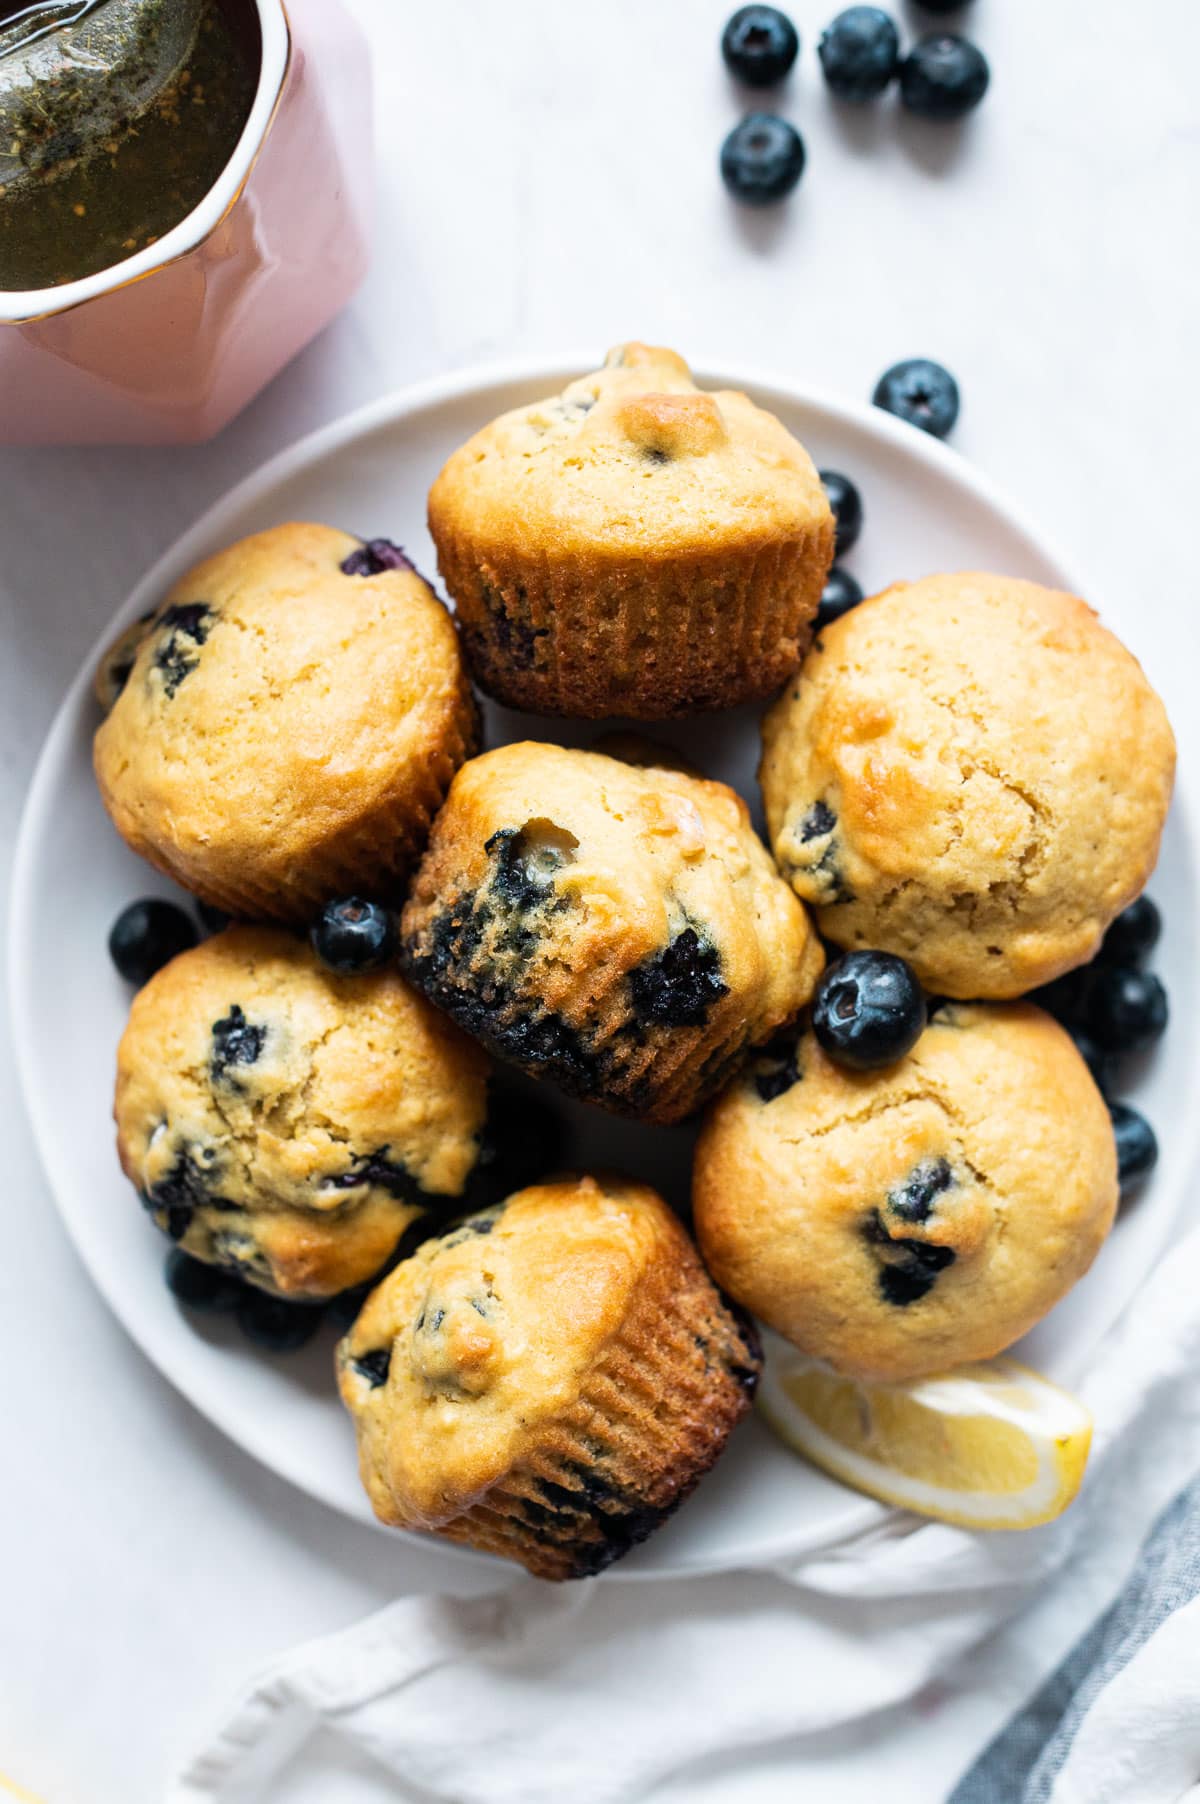 Seven lemon blueberry muffins on a plate with blueberries and lemon slice.